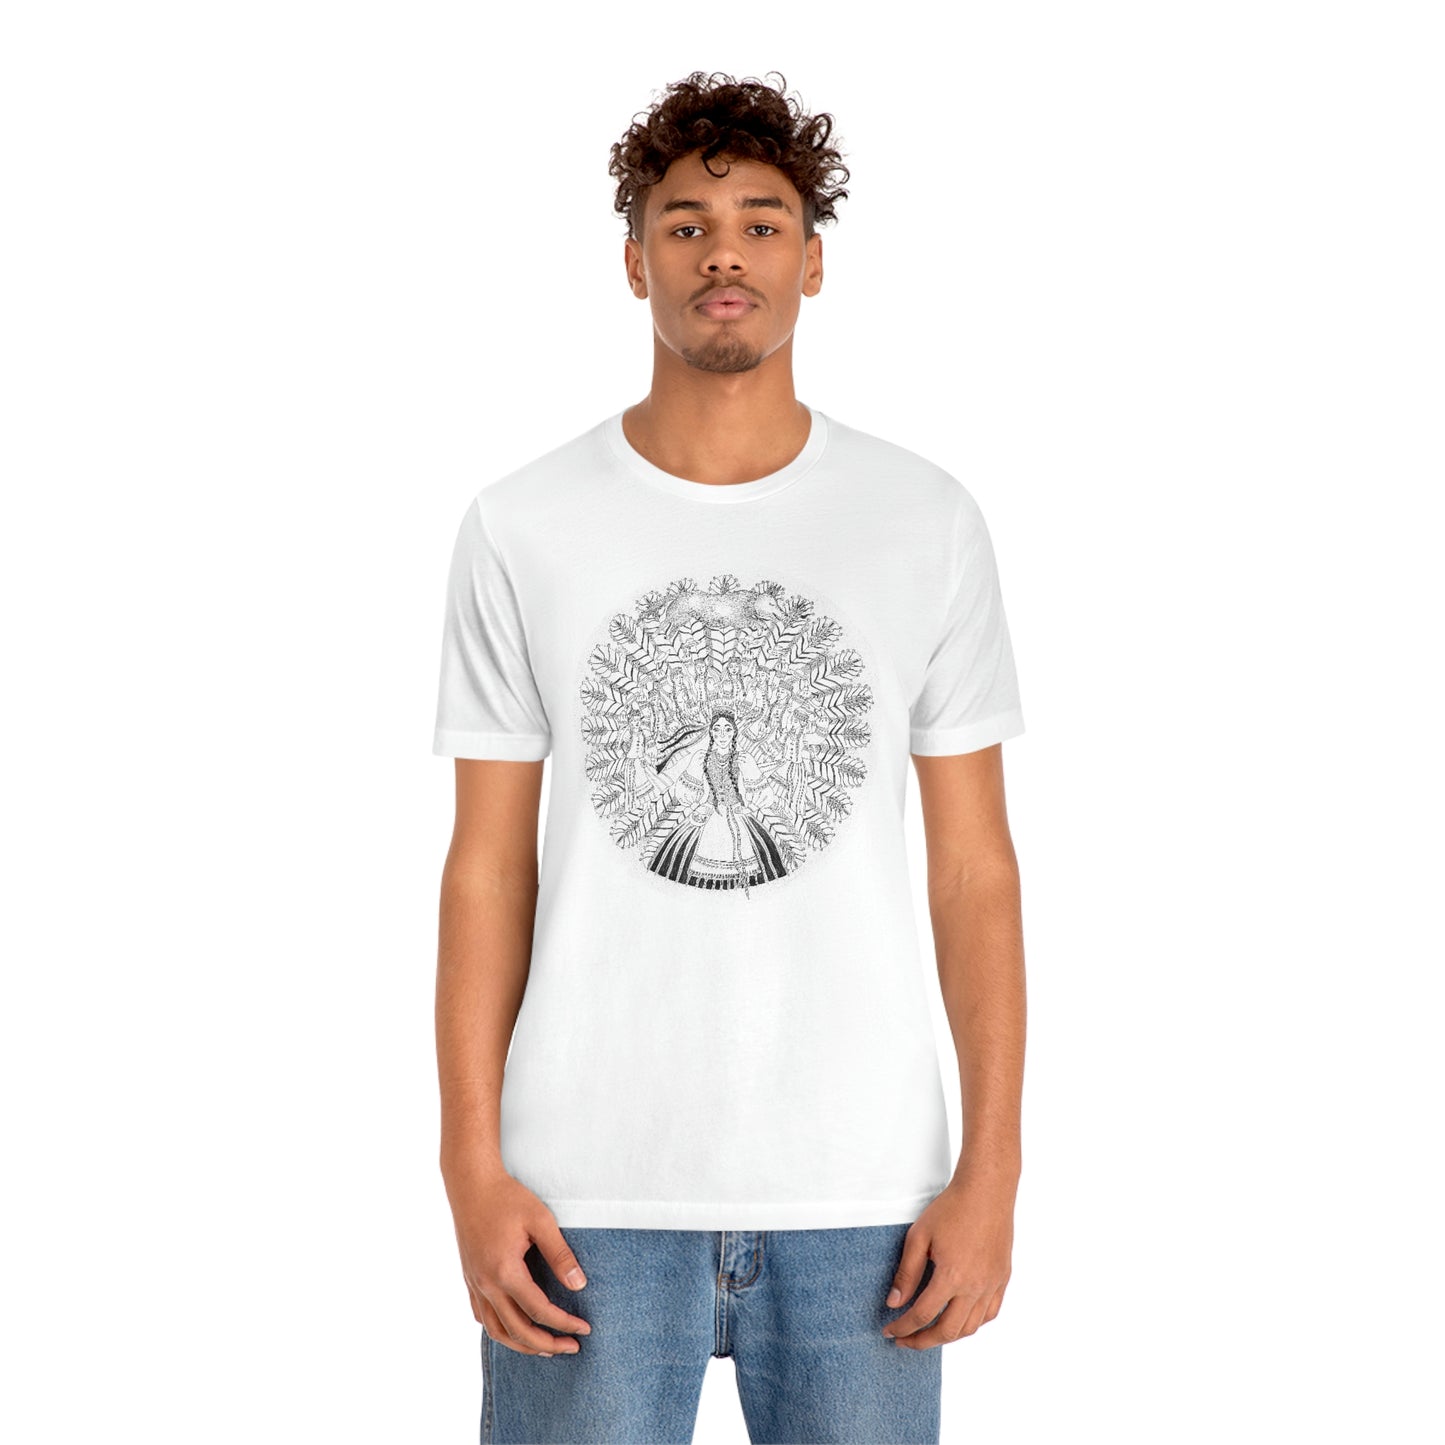 Chinese Zodiac Sign T Shirt (Dog) Unisex Regular Fit Limited Edition